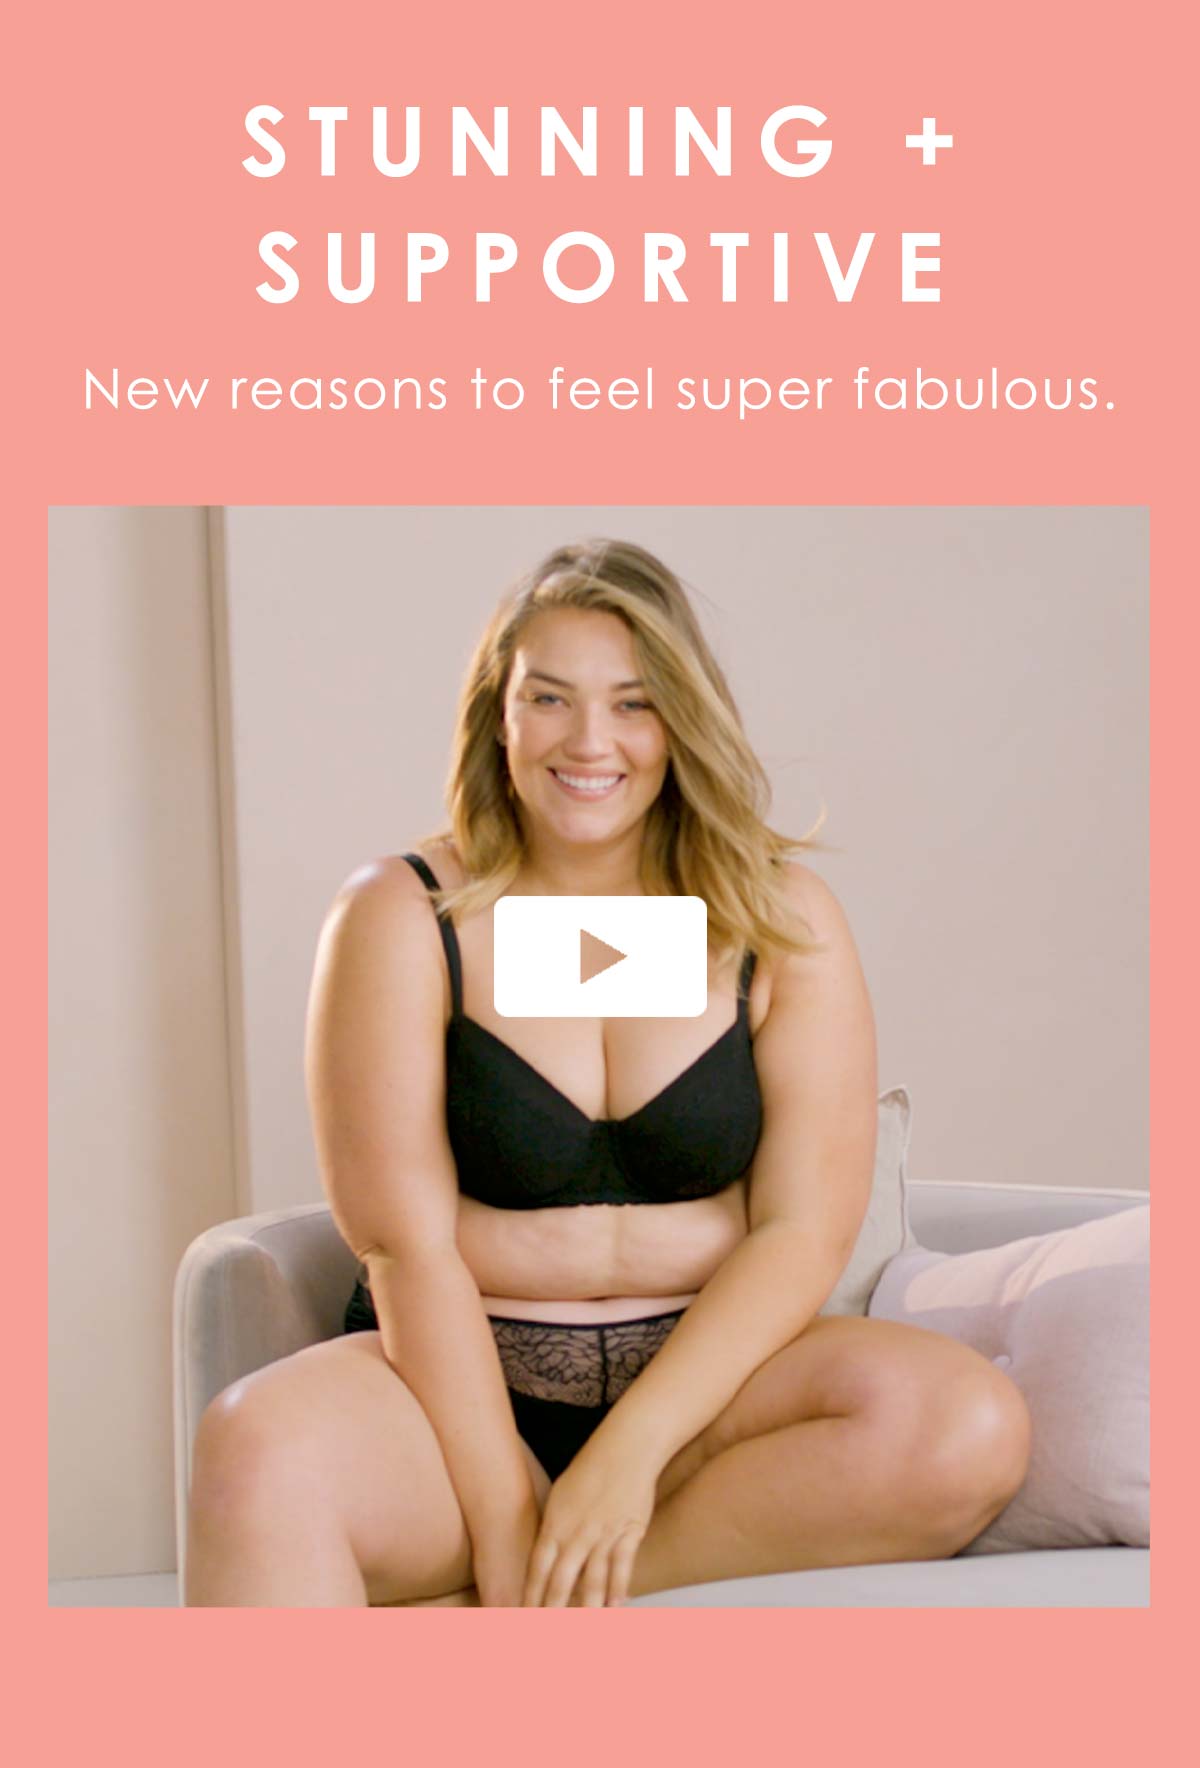 Stunning + supportive. New reasons to feel super fabulous.